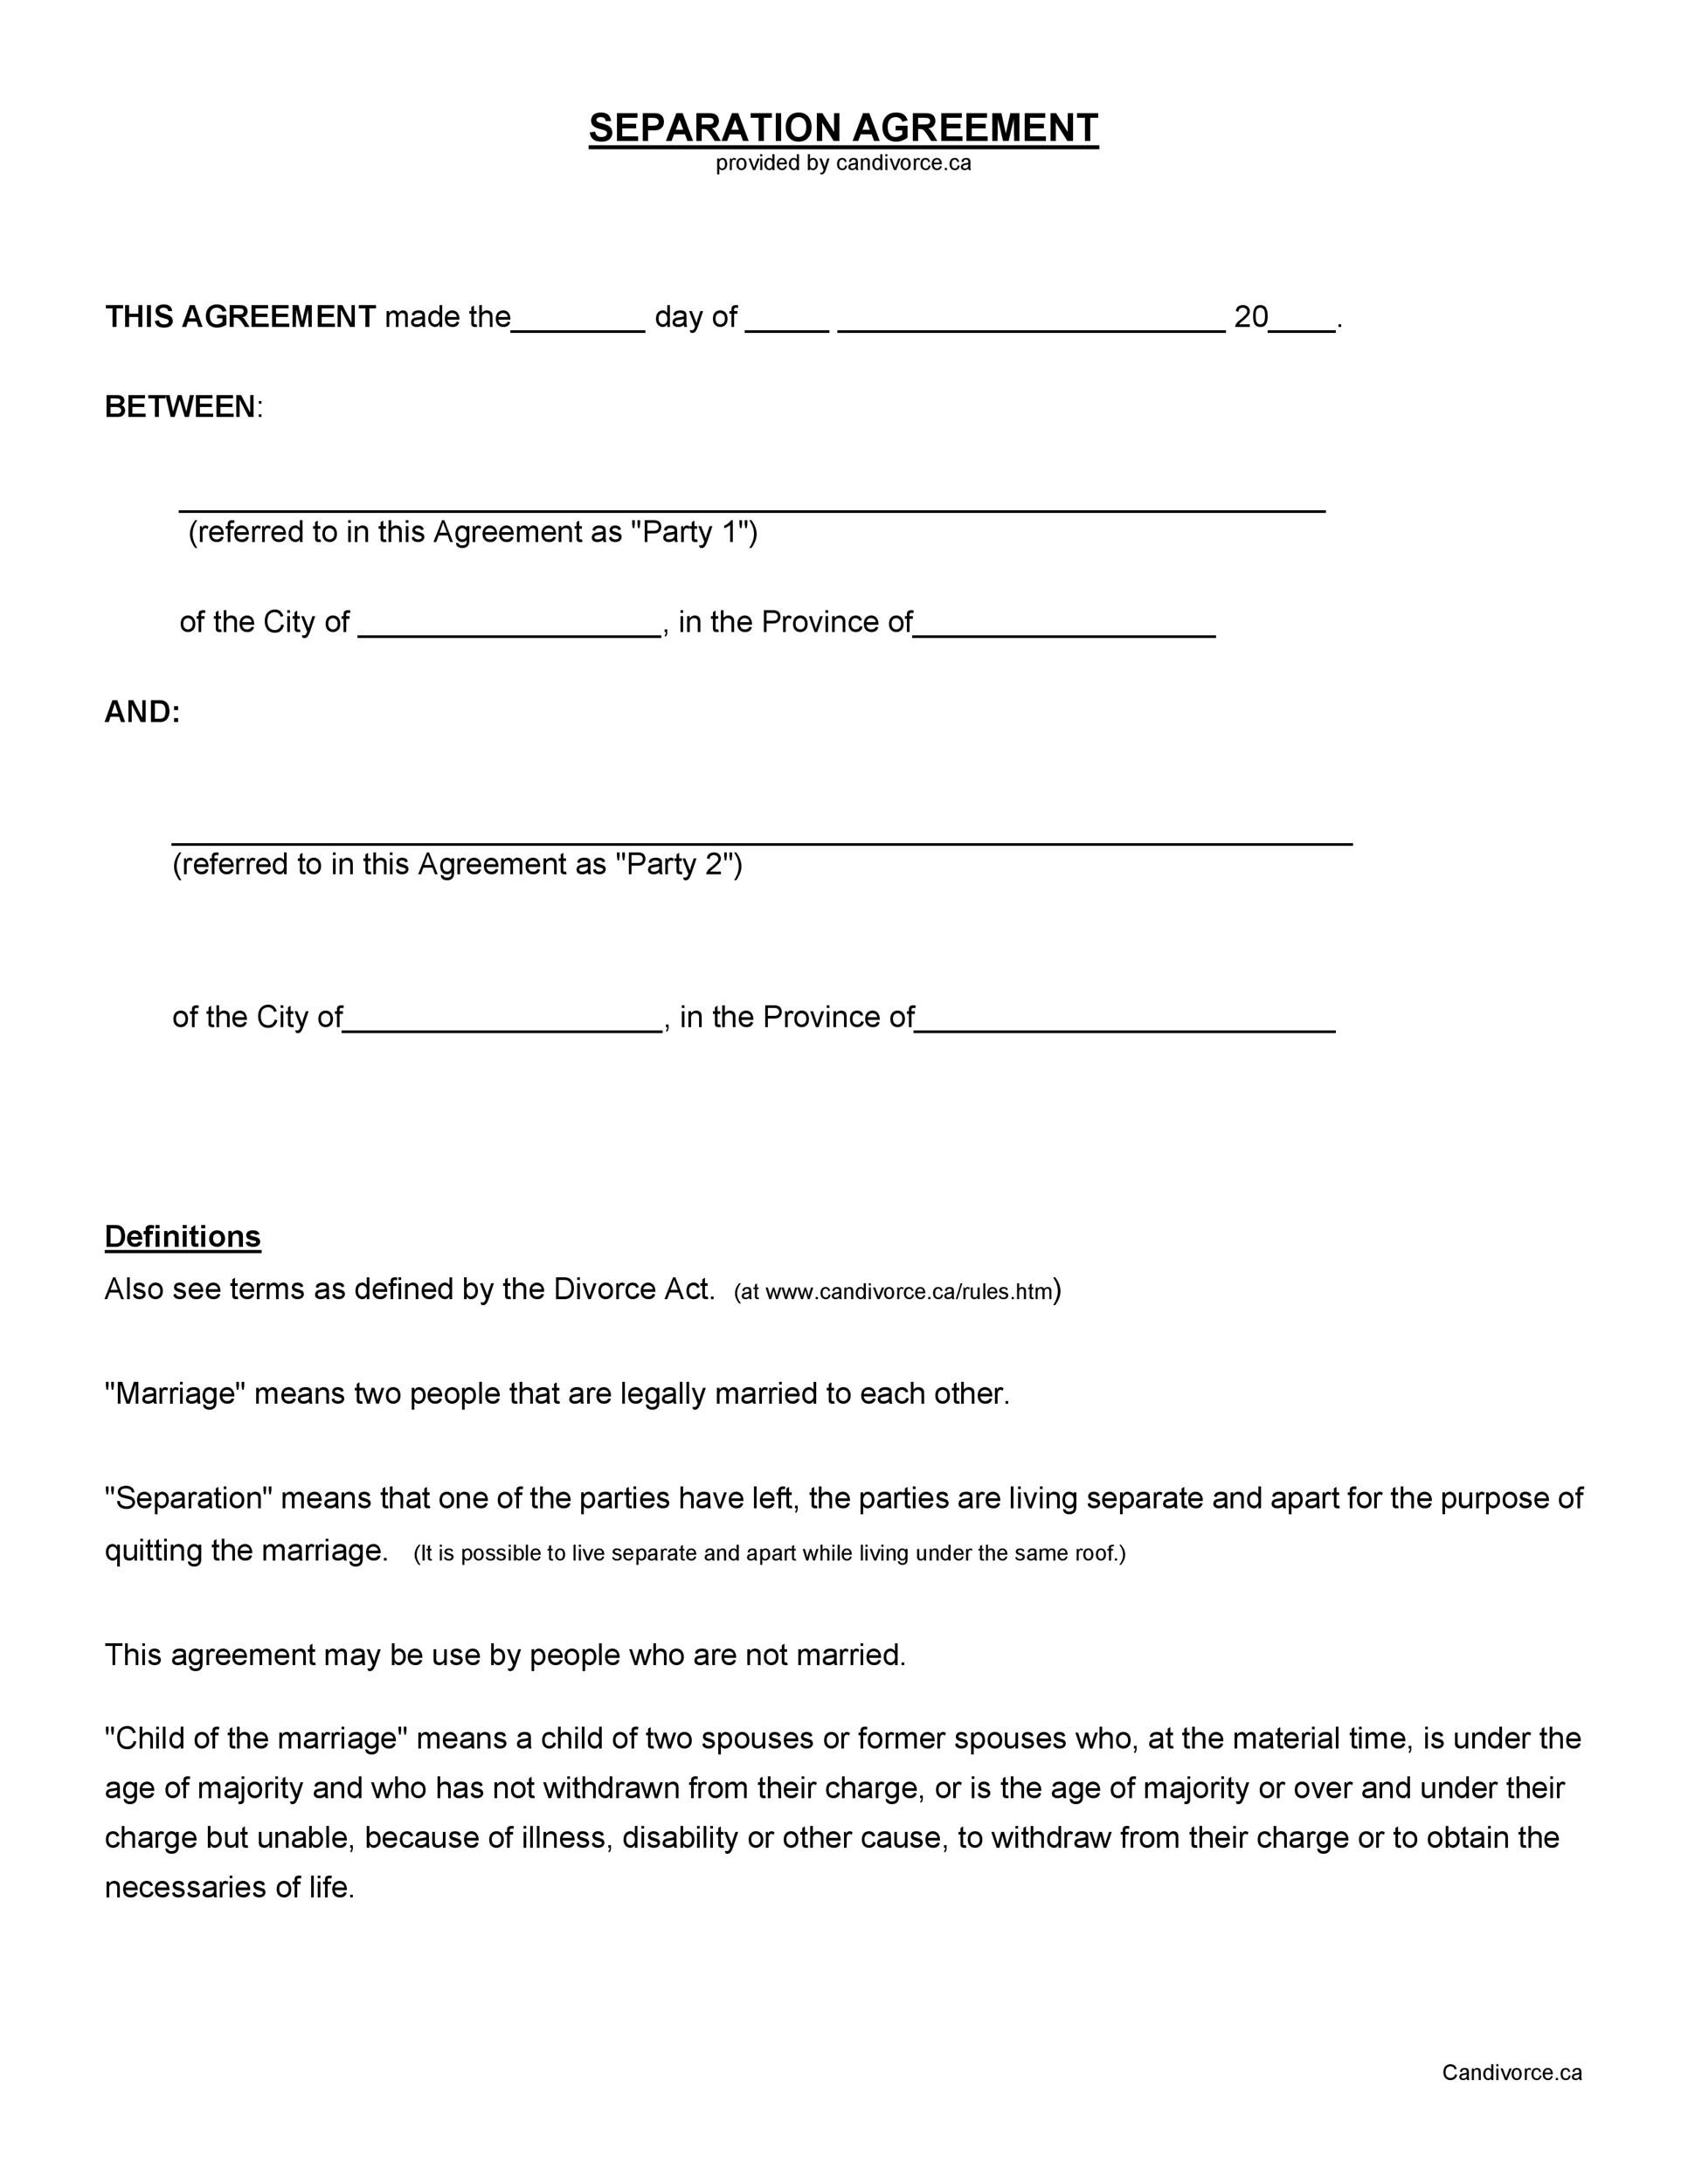 printable-legal-separation-papers-tutore-org-master-of-documents